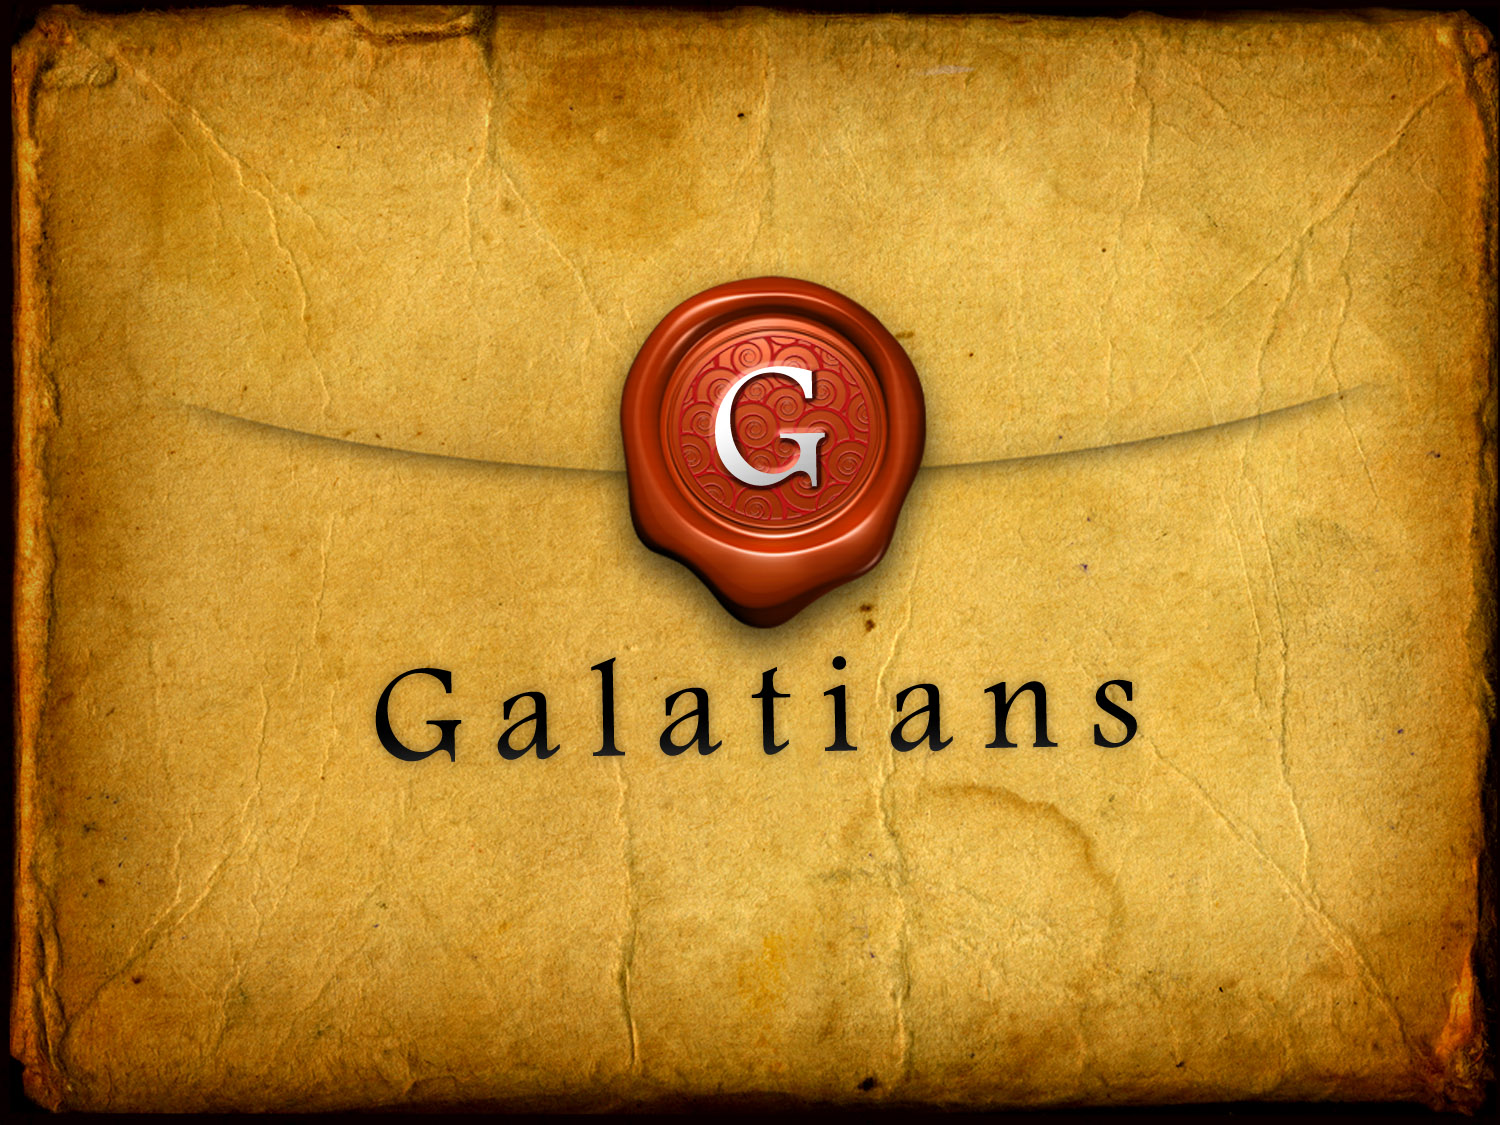 The Book of Galatians 3:1-5